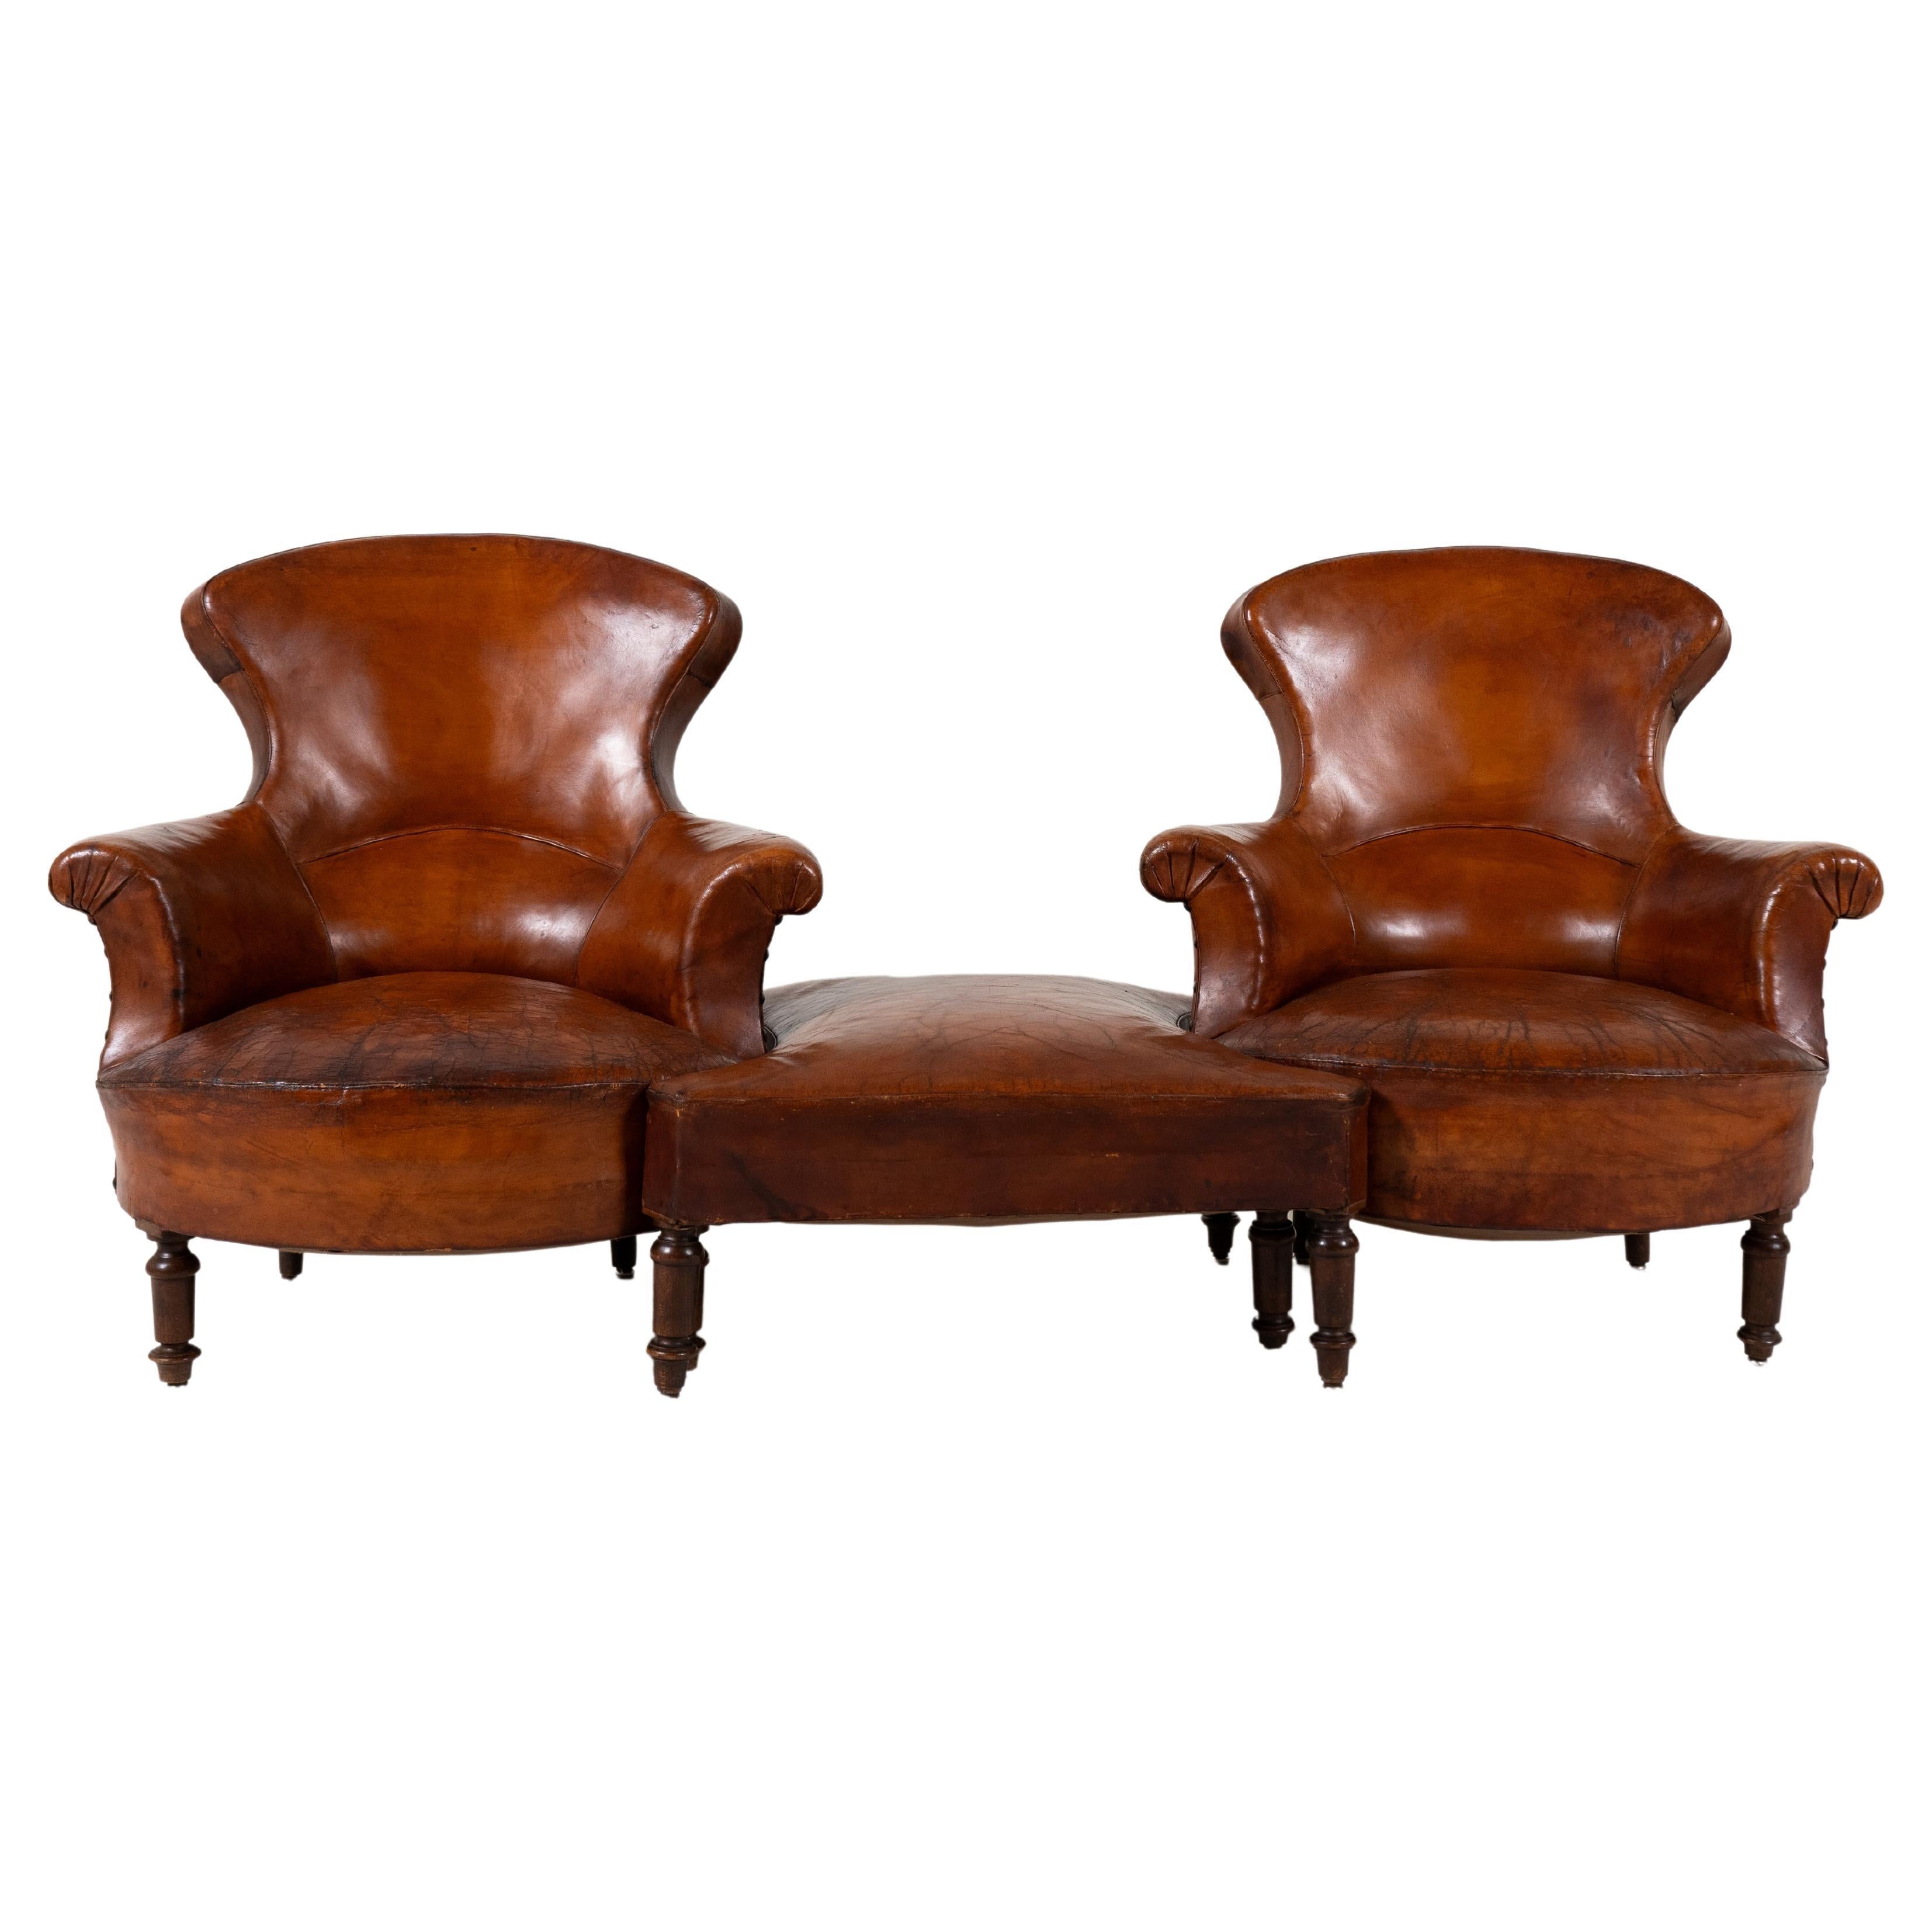 A Vintage 3 Piece Set of Leather Chairs with a Stool, France c.1940